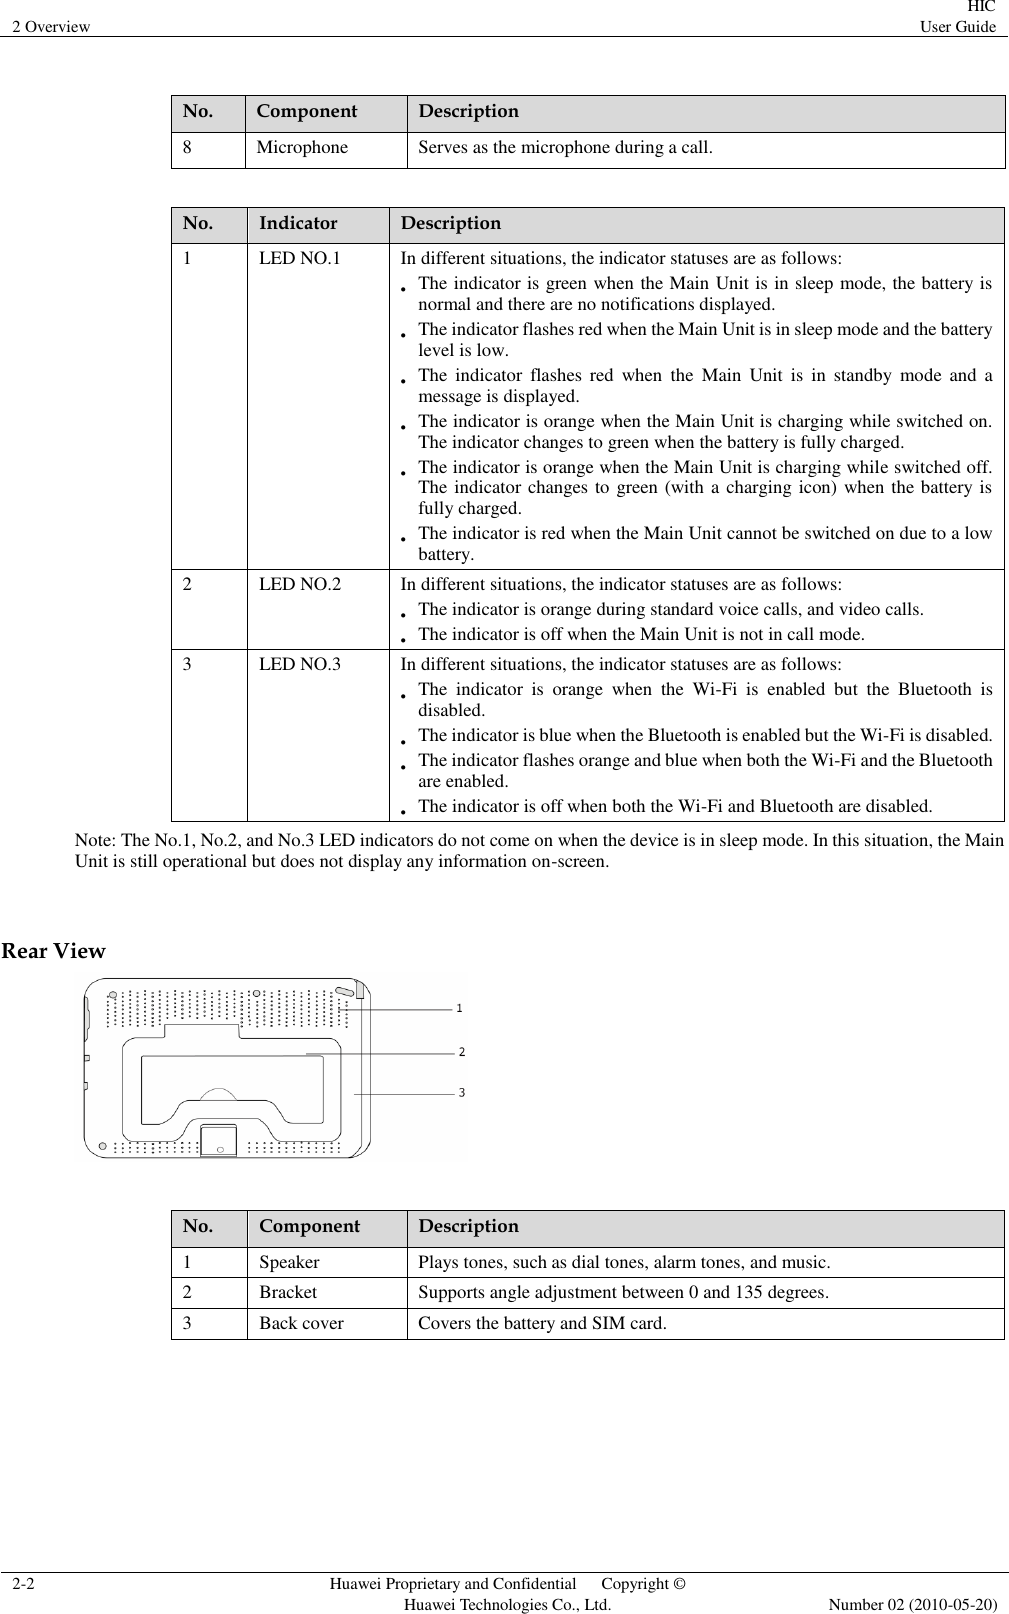 2 Overview HIC User Guide  2-2 Huawei Proprietary and Confidential      Copyright © Huawei Technologies Co., Ltd.  Number 02 (2010-05-20)  No. Component Description 8 Microphone Serves as the microphone during a call.   No. Indicator Description 1 LED NO.1 In different situations, the indicator statuses are as follows:  The indicator is green when the Main Unit is in sleep mode, the battery is normal and there are no notifications displayed.  The indicator flashes red when the Main Unit is in sleep mode and the battery level is low.  The  indicator  flashes  red  when  the  Main  Unit  is  in  standby  mode  and  a message is displayed.  The indicator is orange when the Main Unit is charging while switched on. The indicator changes to green when the battery is fully charged.  The indicator is orange when the Main Unit is charging while switched off. The indicator changes to green (with a charging icon) when the battery is fully charged.  The indicator is red when the Main Unit cannot be switched on due to a low battery. 2 LED NO.2 In different situations, the indicator statuses are as follows:  The indicator is orange during standard voice calls, and video calls.  The indicator is off when the Main Unit is not in call mode. 3 LED NO.3 In different situations, the indicator statuses are as follows:  The  indicator  is  orange  when  the  Wi-Fi  is  enabled  but  the  Bluetooth  is disabled.  The indicator is blue when the Bluetooth is enabled but the Wi-Fi is disabled.  The indicator flashes orange and blue when both the Wi-Fi and the Bluetooth are enabled.  The indicator is off when both the Wi-Fi and Bluetooth are disabled. Note: The No.1, No.2, and No.3 LED indicators do not come on when the device is in sleep mode. In this situation, the Main Unit is still operational but does not display any information on-screen.  Rear View   No. Component Description 1 Speaker Plays tones, such as dial tones, alarm tones, and music. 2 Bracket Supports angle adjustment between 0 and 135 degrees. 3 Back cover Covers the battery and SIM card.     